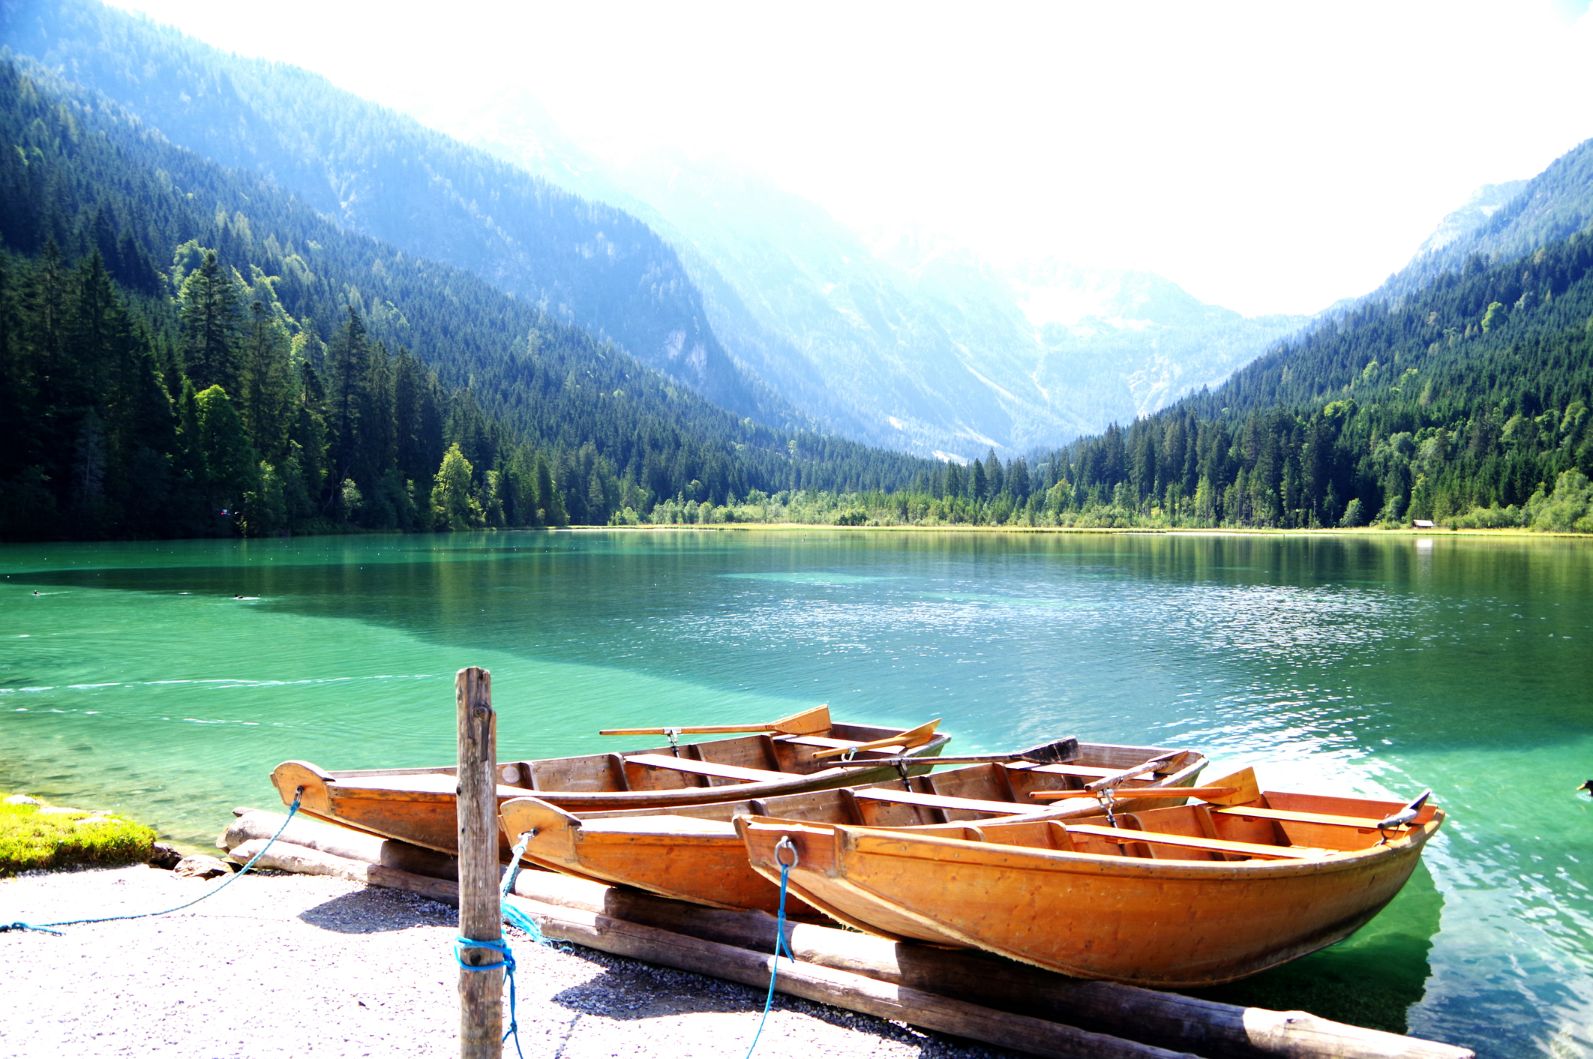 Wooden boats and a turquoise lake